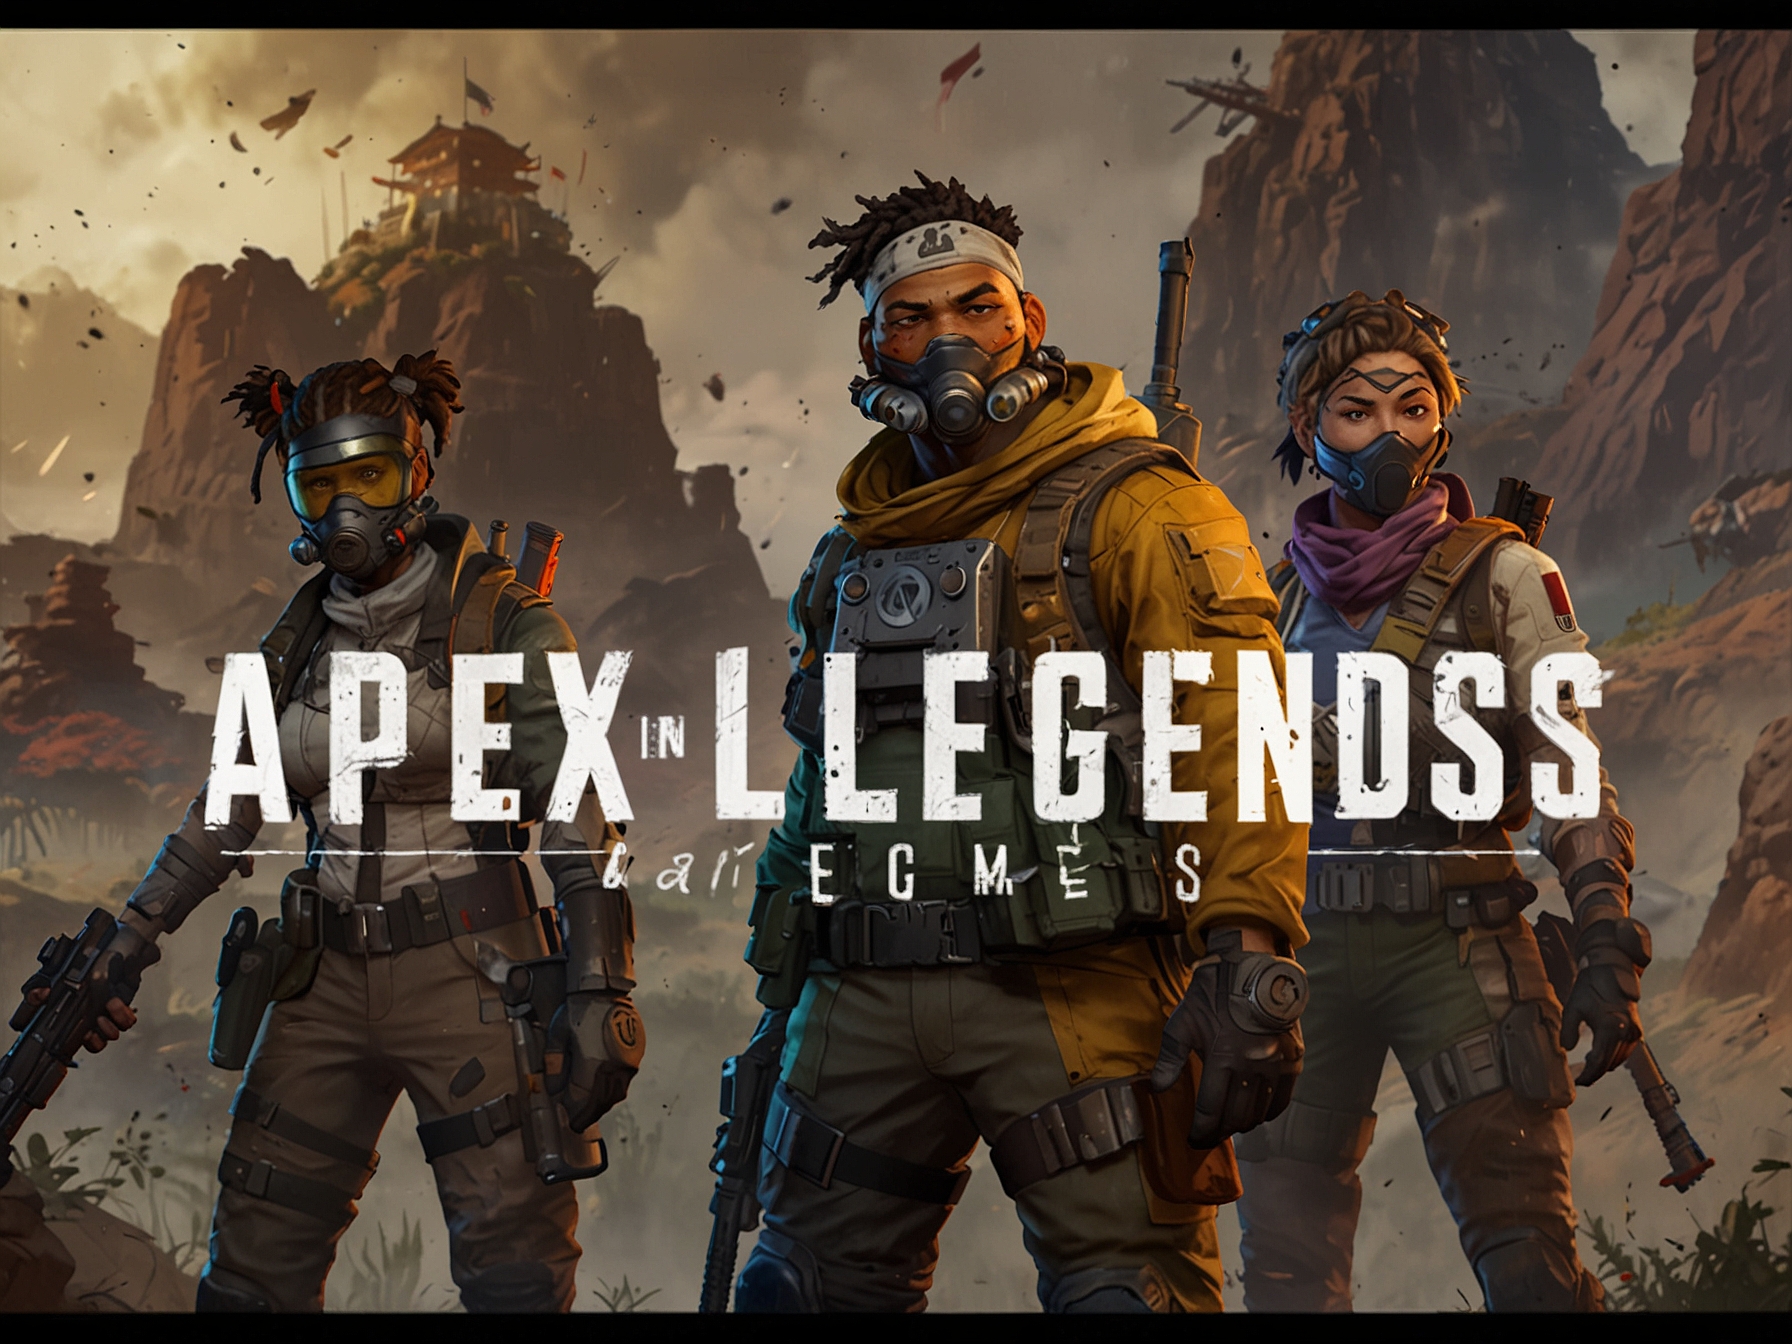 An in-game scene from Apex Legends featuring Legends in a squad-based operation, demonstrating key strategies like effective looting, map mastery, and leveraging the game's unique movement mechanics.